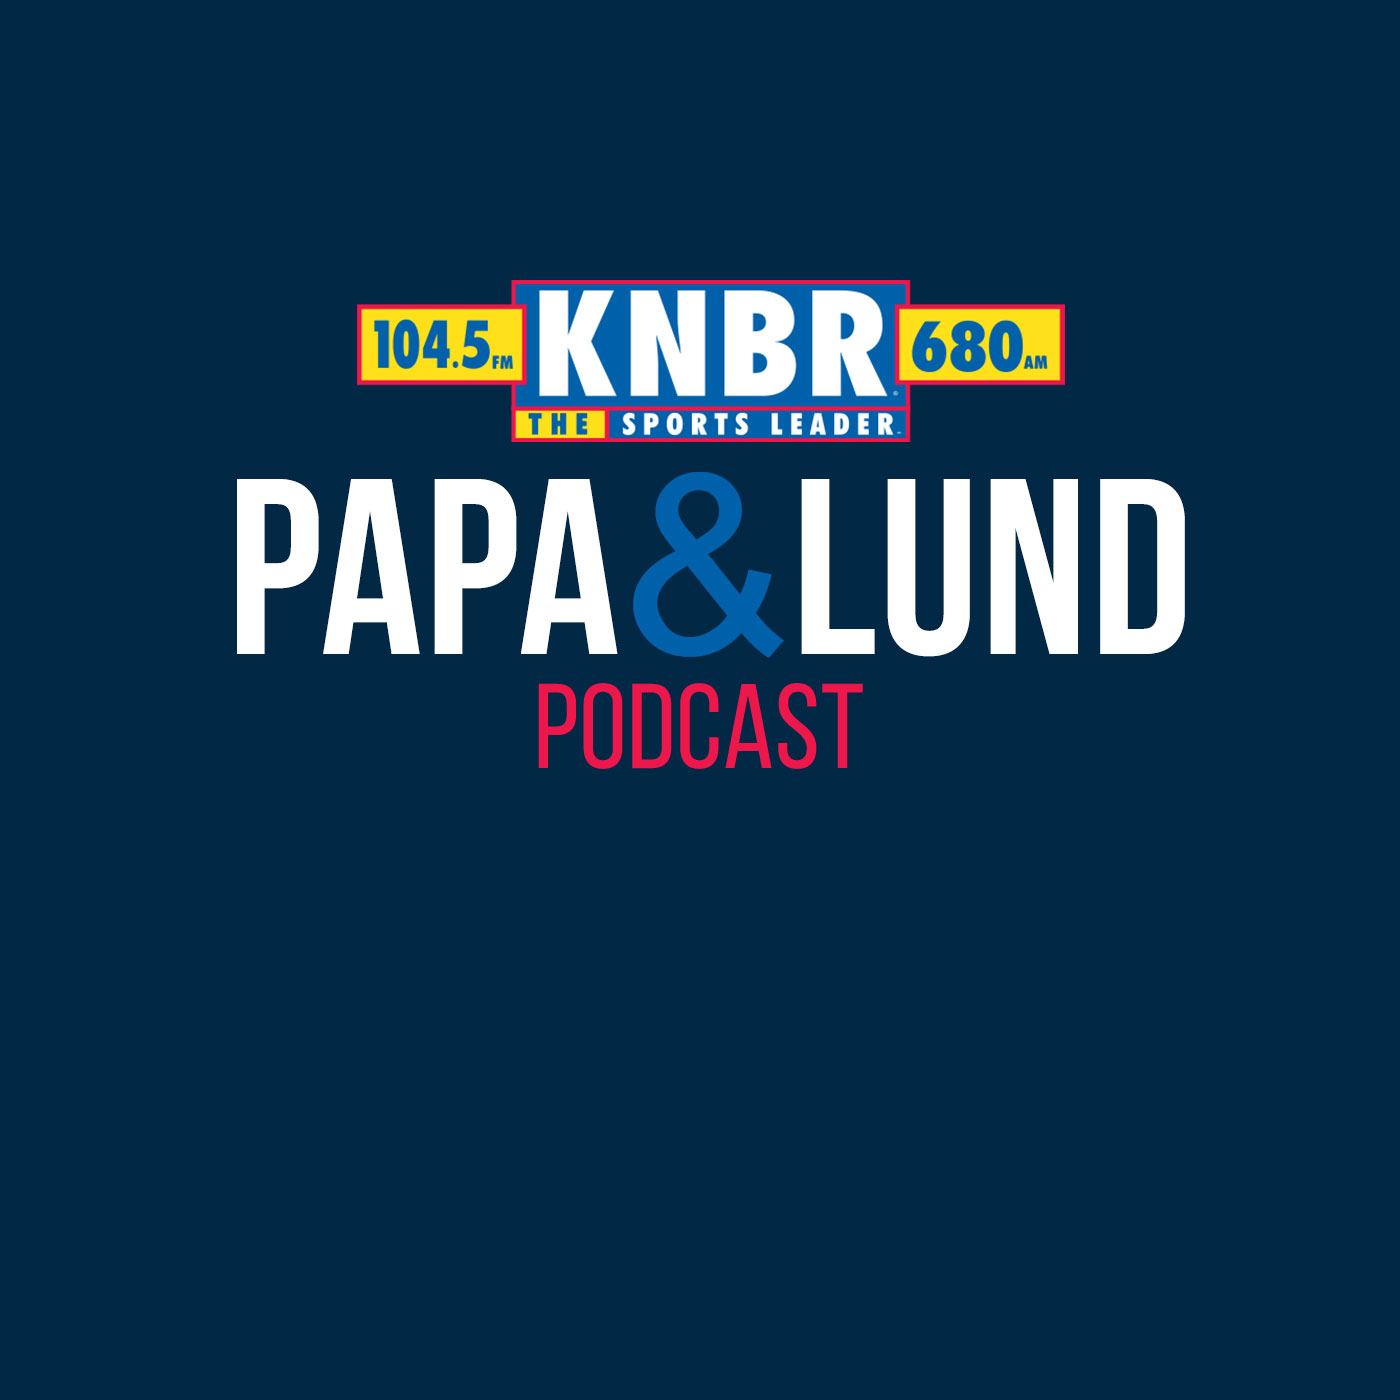 11-10 Matt Maiocco joins Papa & Lund to talk Steve Wilks, Chase Young, and the Niners' defense as a whole not playing to their potential